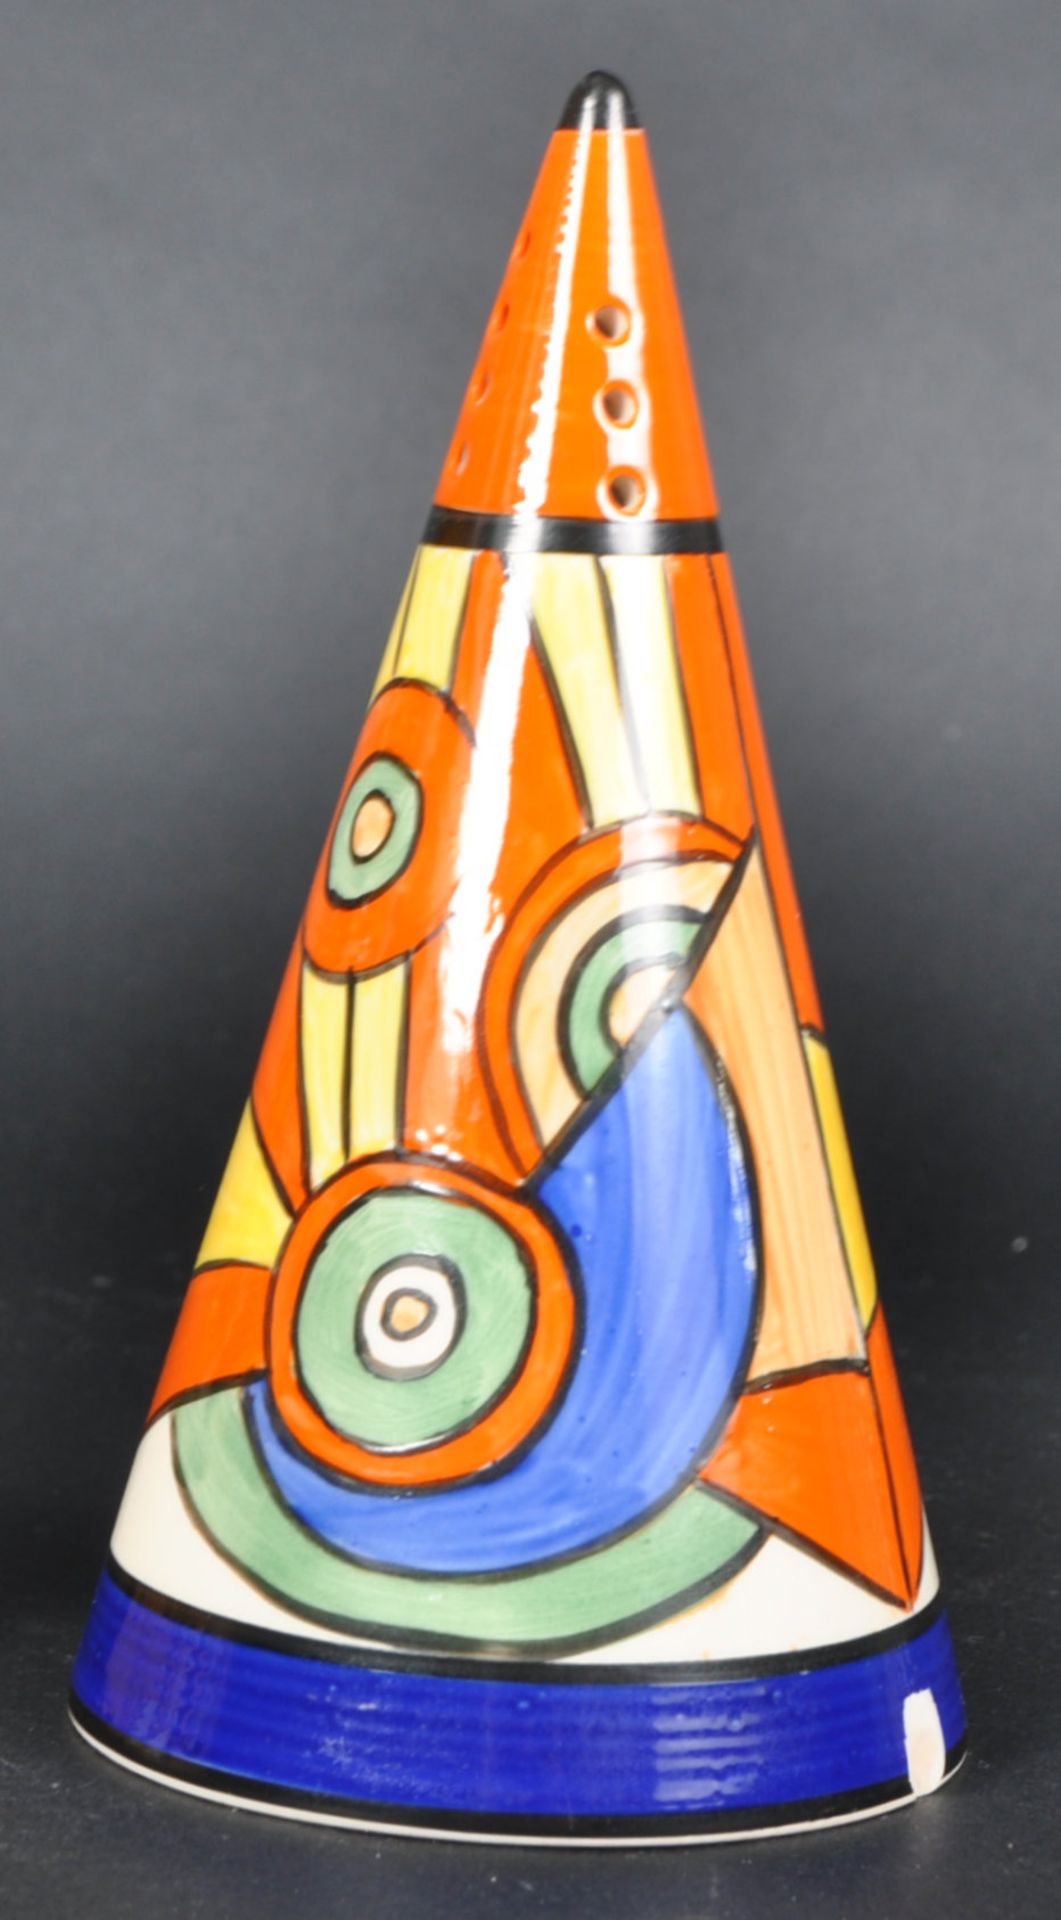 CLARICE CLIFF SLICED CIRCLE CONICAL SUGAR SIFTER - Image 3 of 6